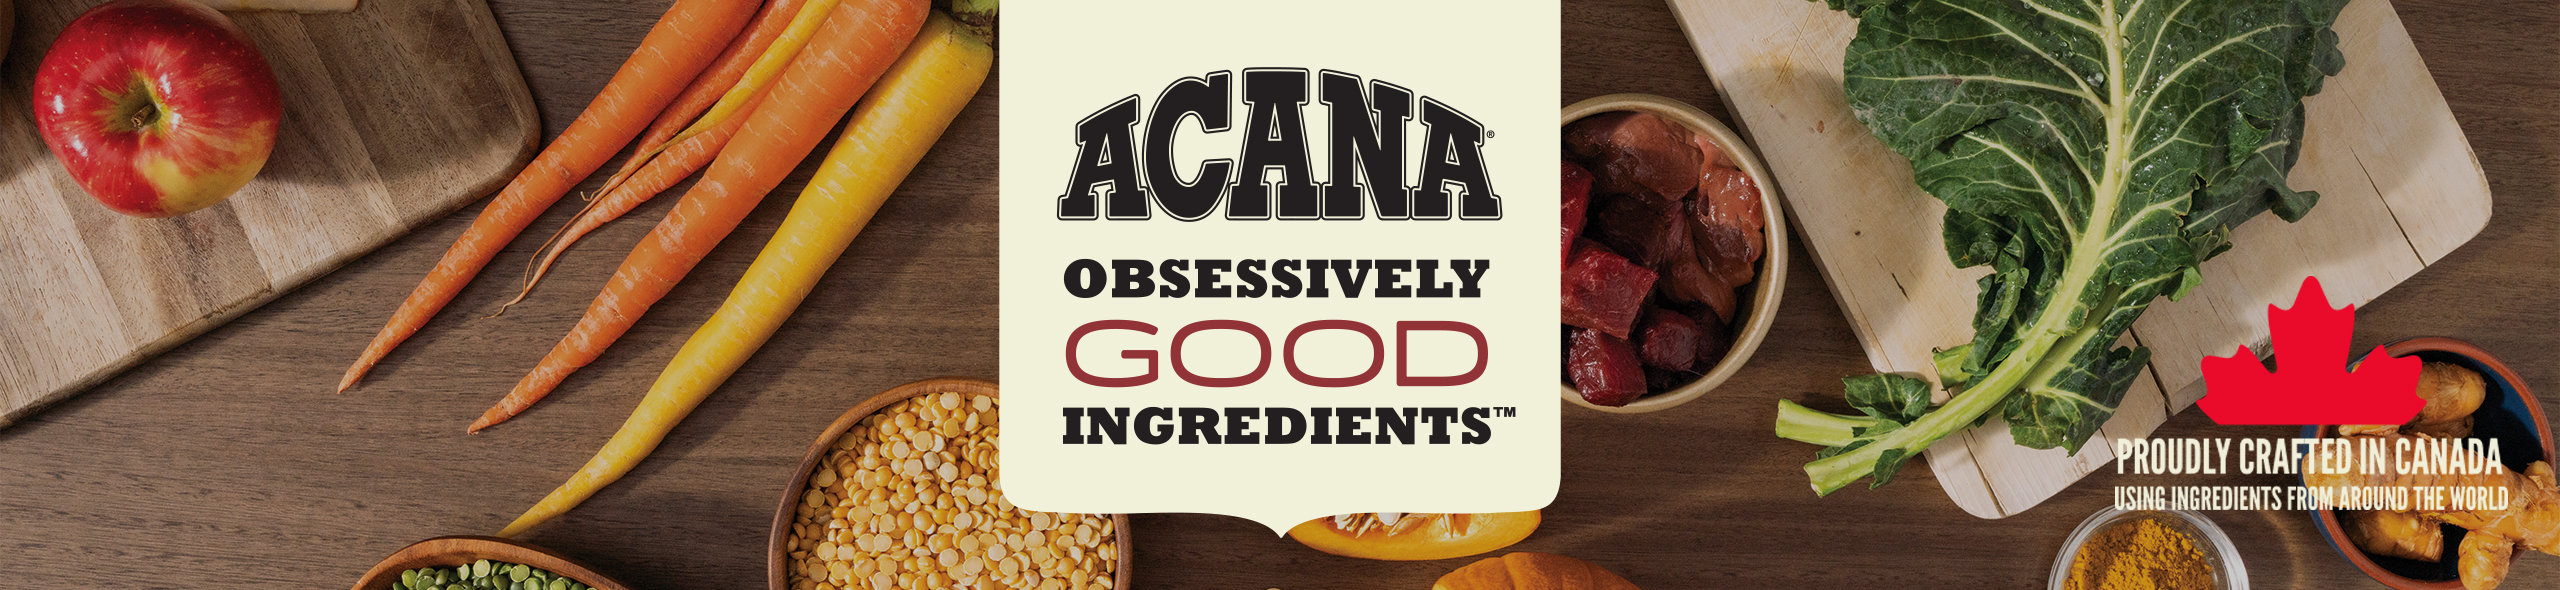 Acana Obsessively good ingredients